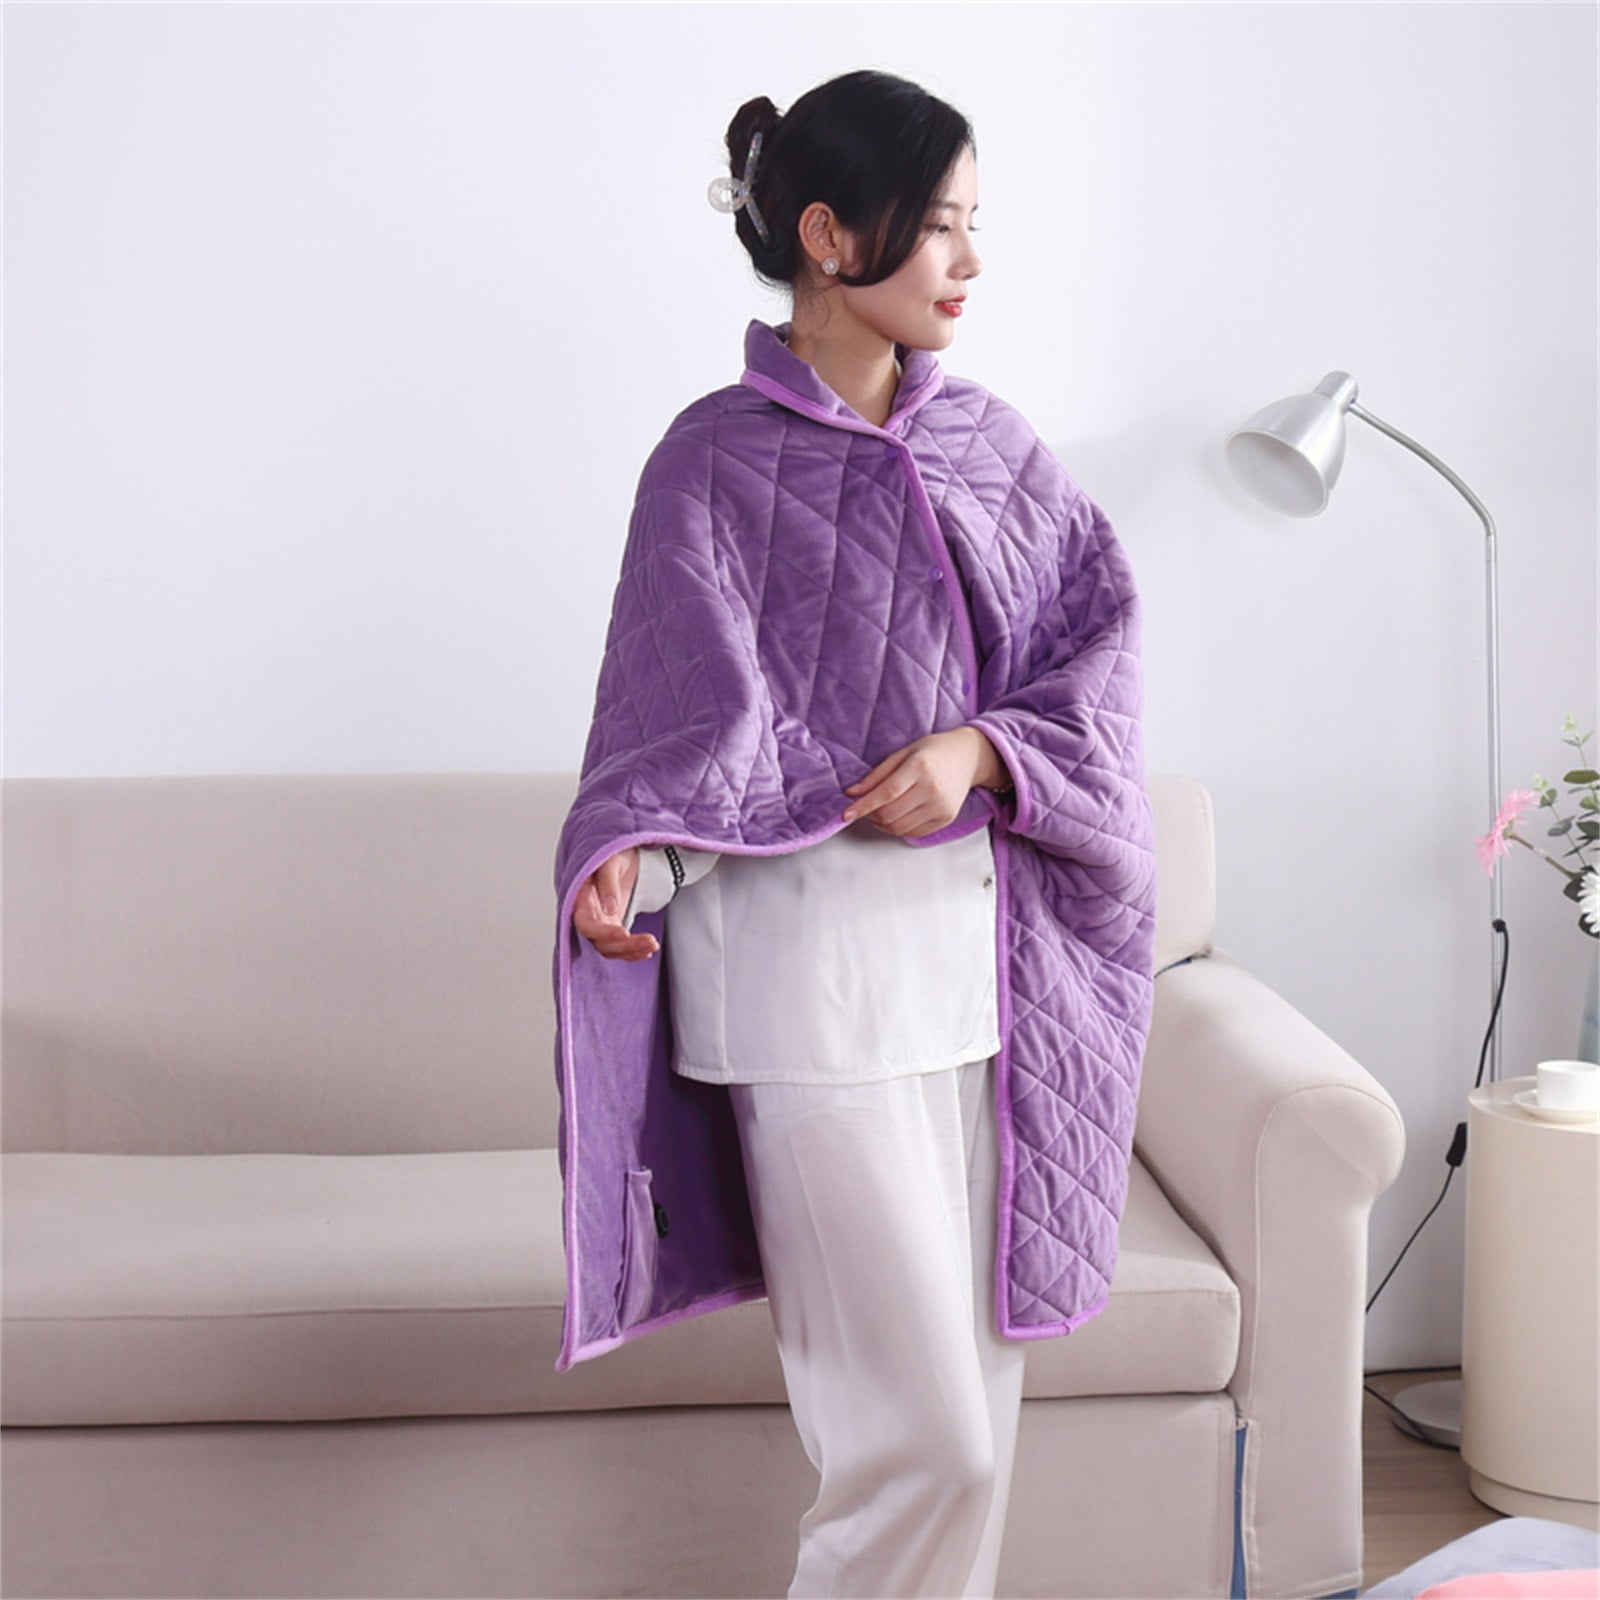 ComfyLife™ Wearable Heated Blanket Electric Throw